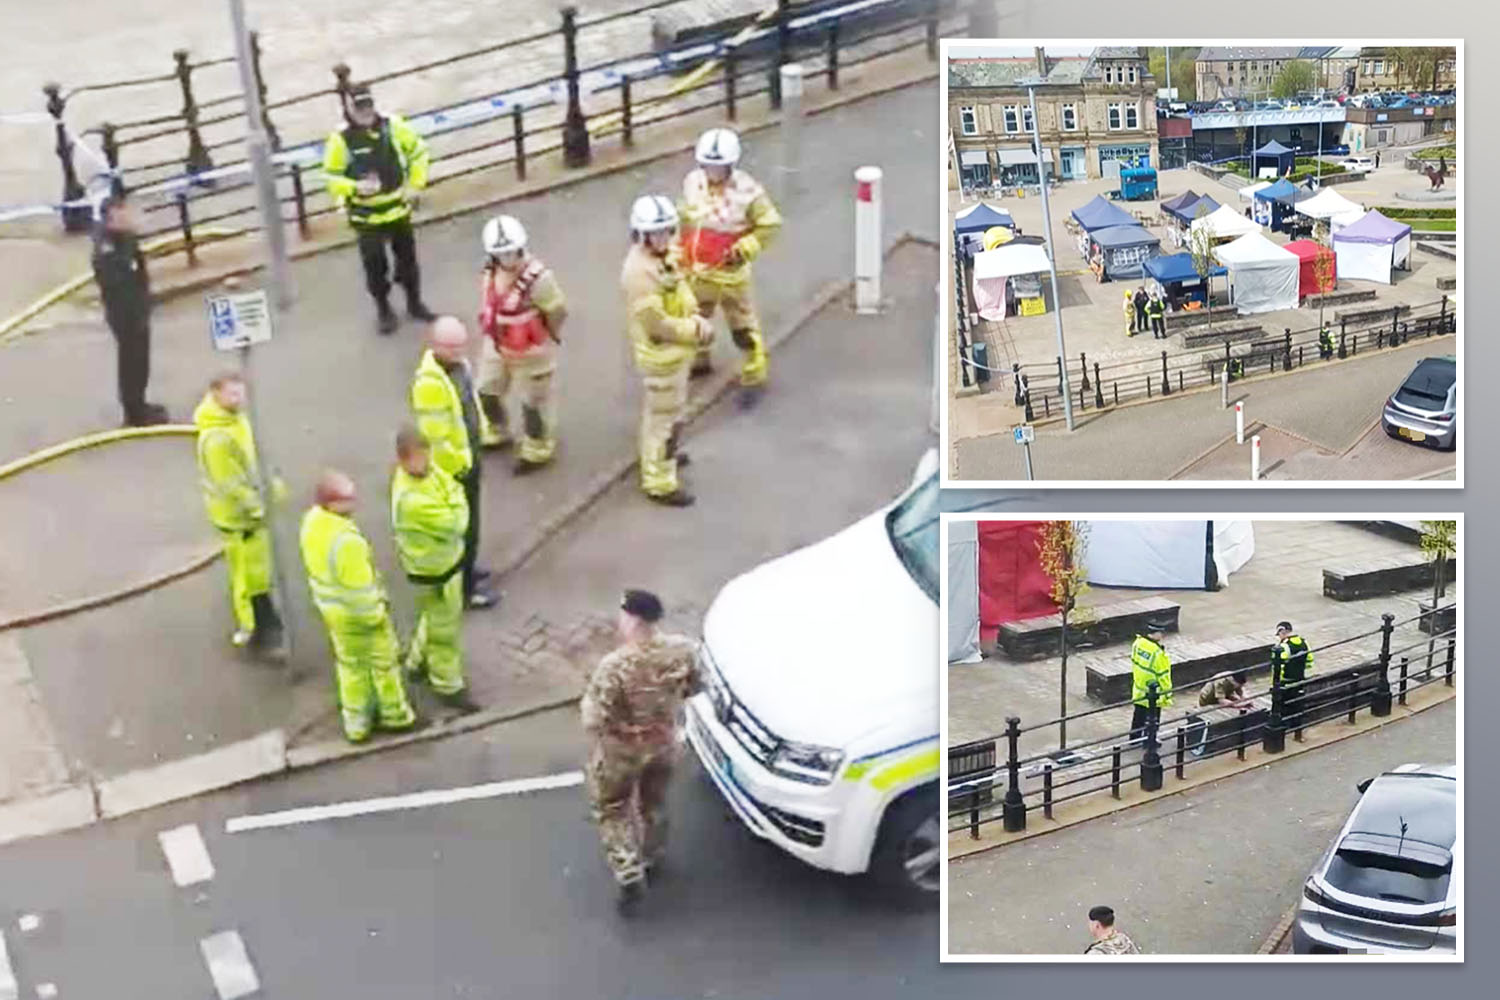 UK town centre on lockdown after 'grenade found' with huge emergency response